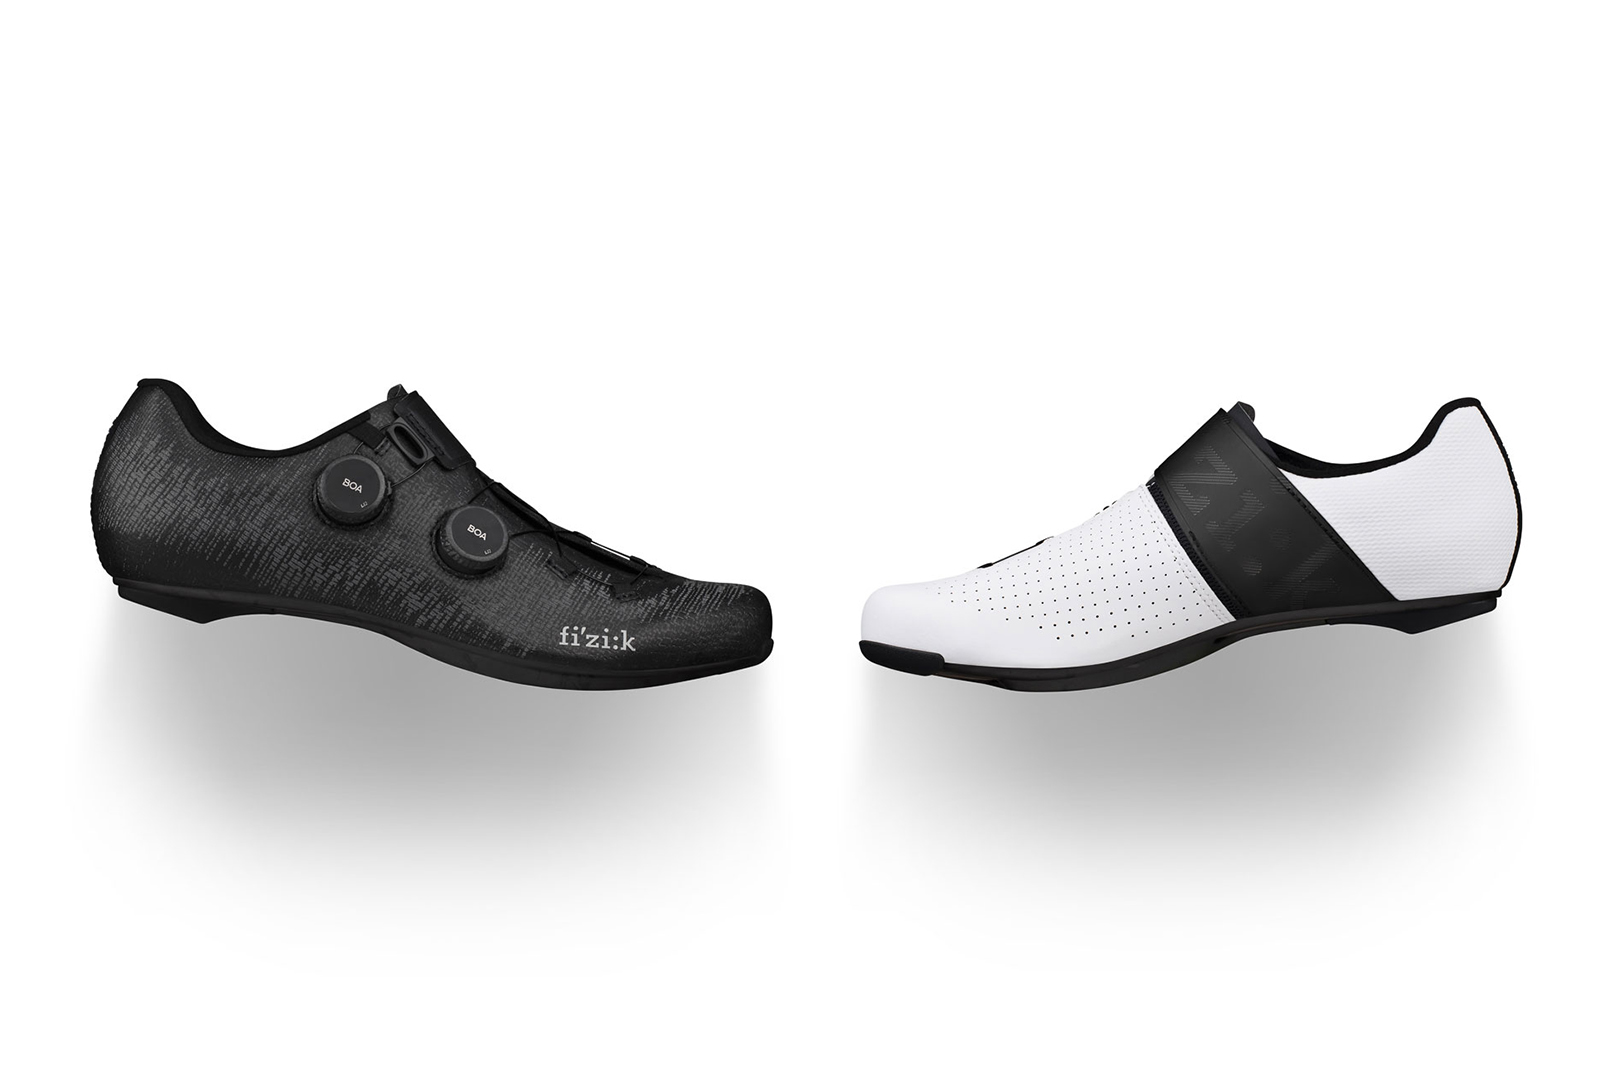 The Fizik Vento Infinito Carbon 2 Wide Brings Comfort to Road